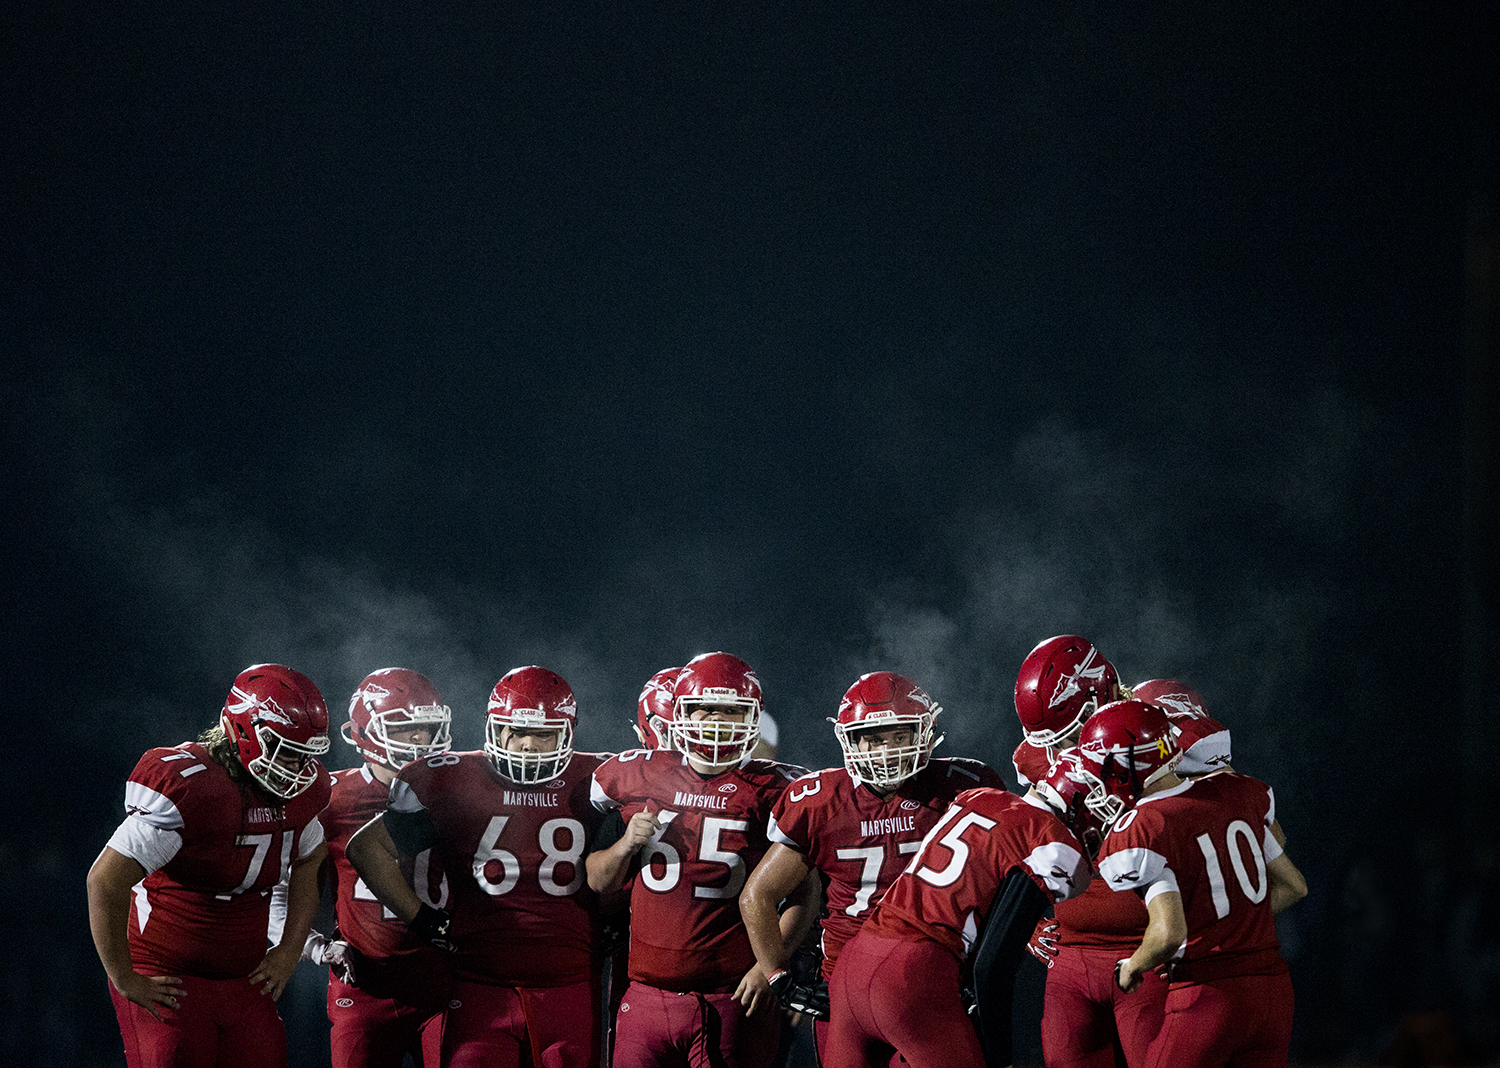  Steam from Marysville-Pilchuck player’s breath rises above the their offensive huddle before the snap during the annual Berry Bowl game against Marysville-Gretchell on Oct. 5, 2018 in Marysville, Washington. 